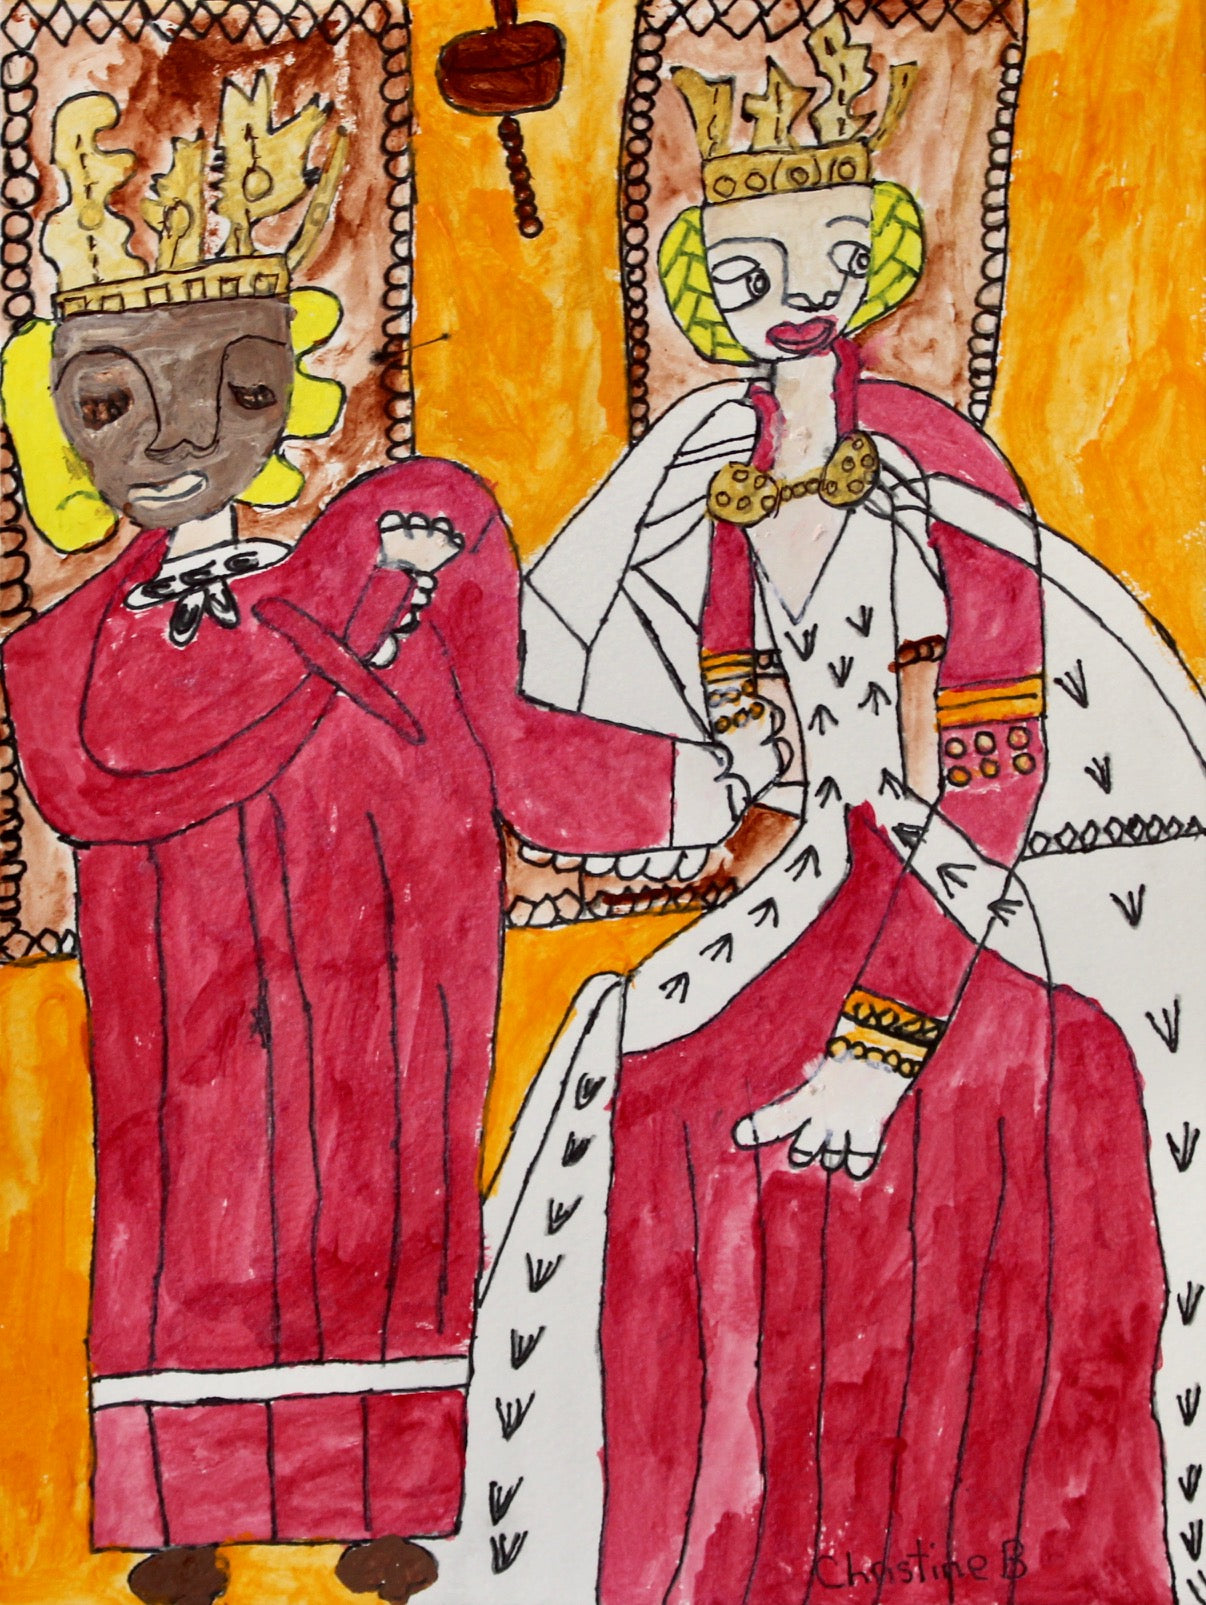 Christine Buda, "The Royal King and Queen"